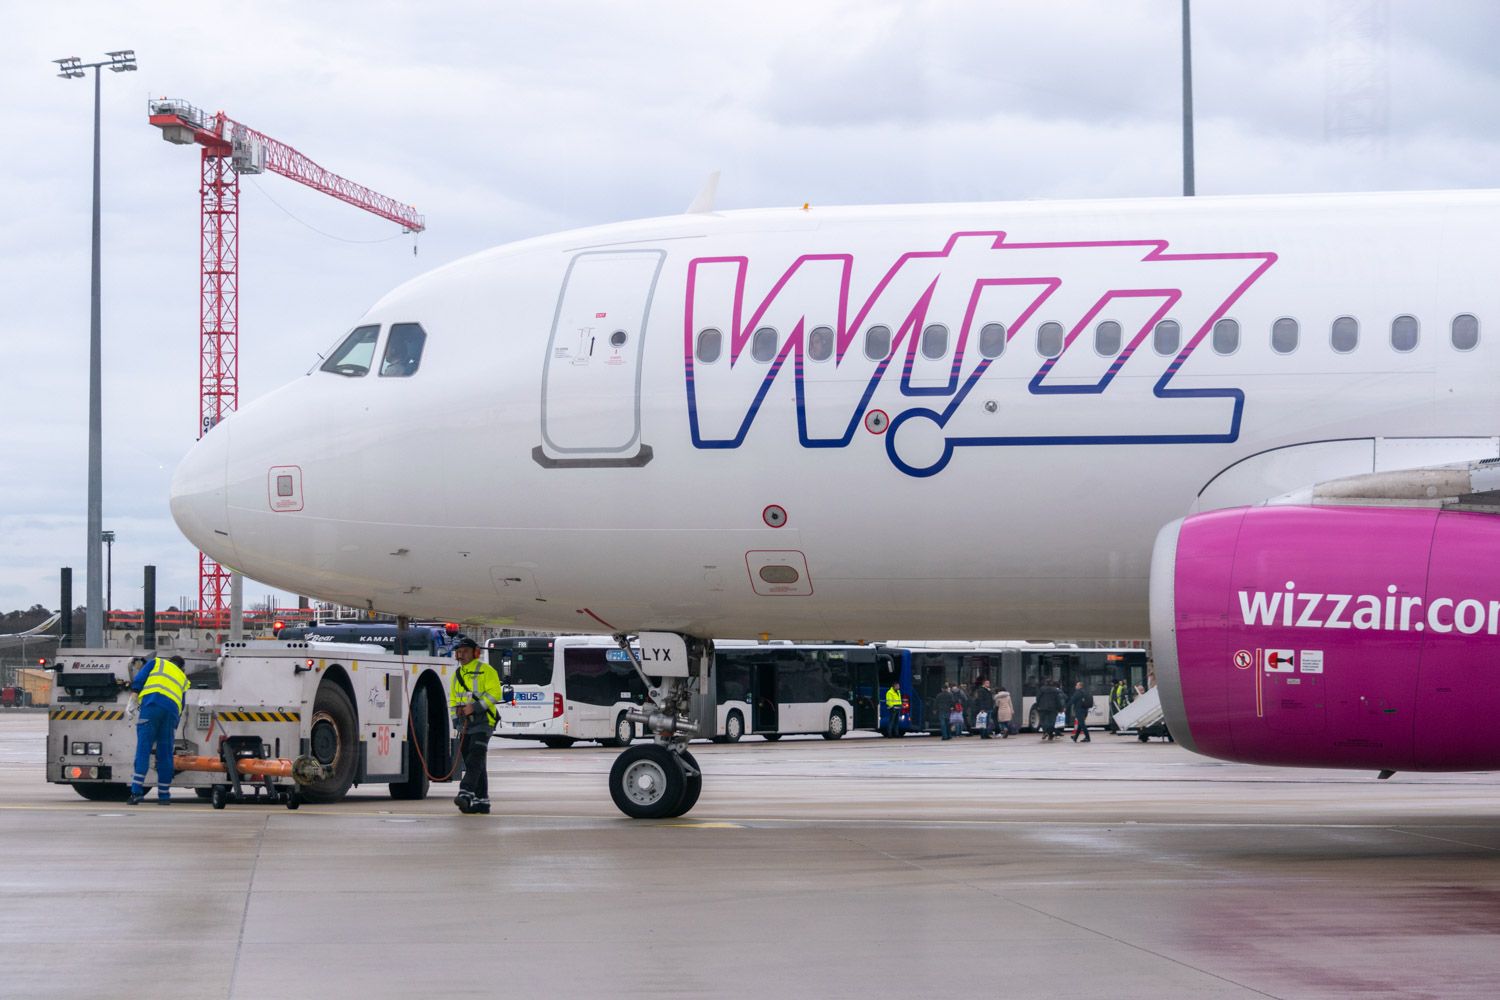 Wizz Air Airbus during the turnaround by Tom Boon